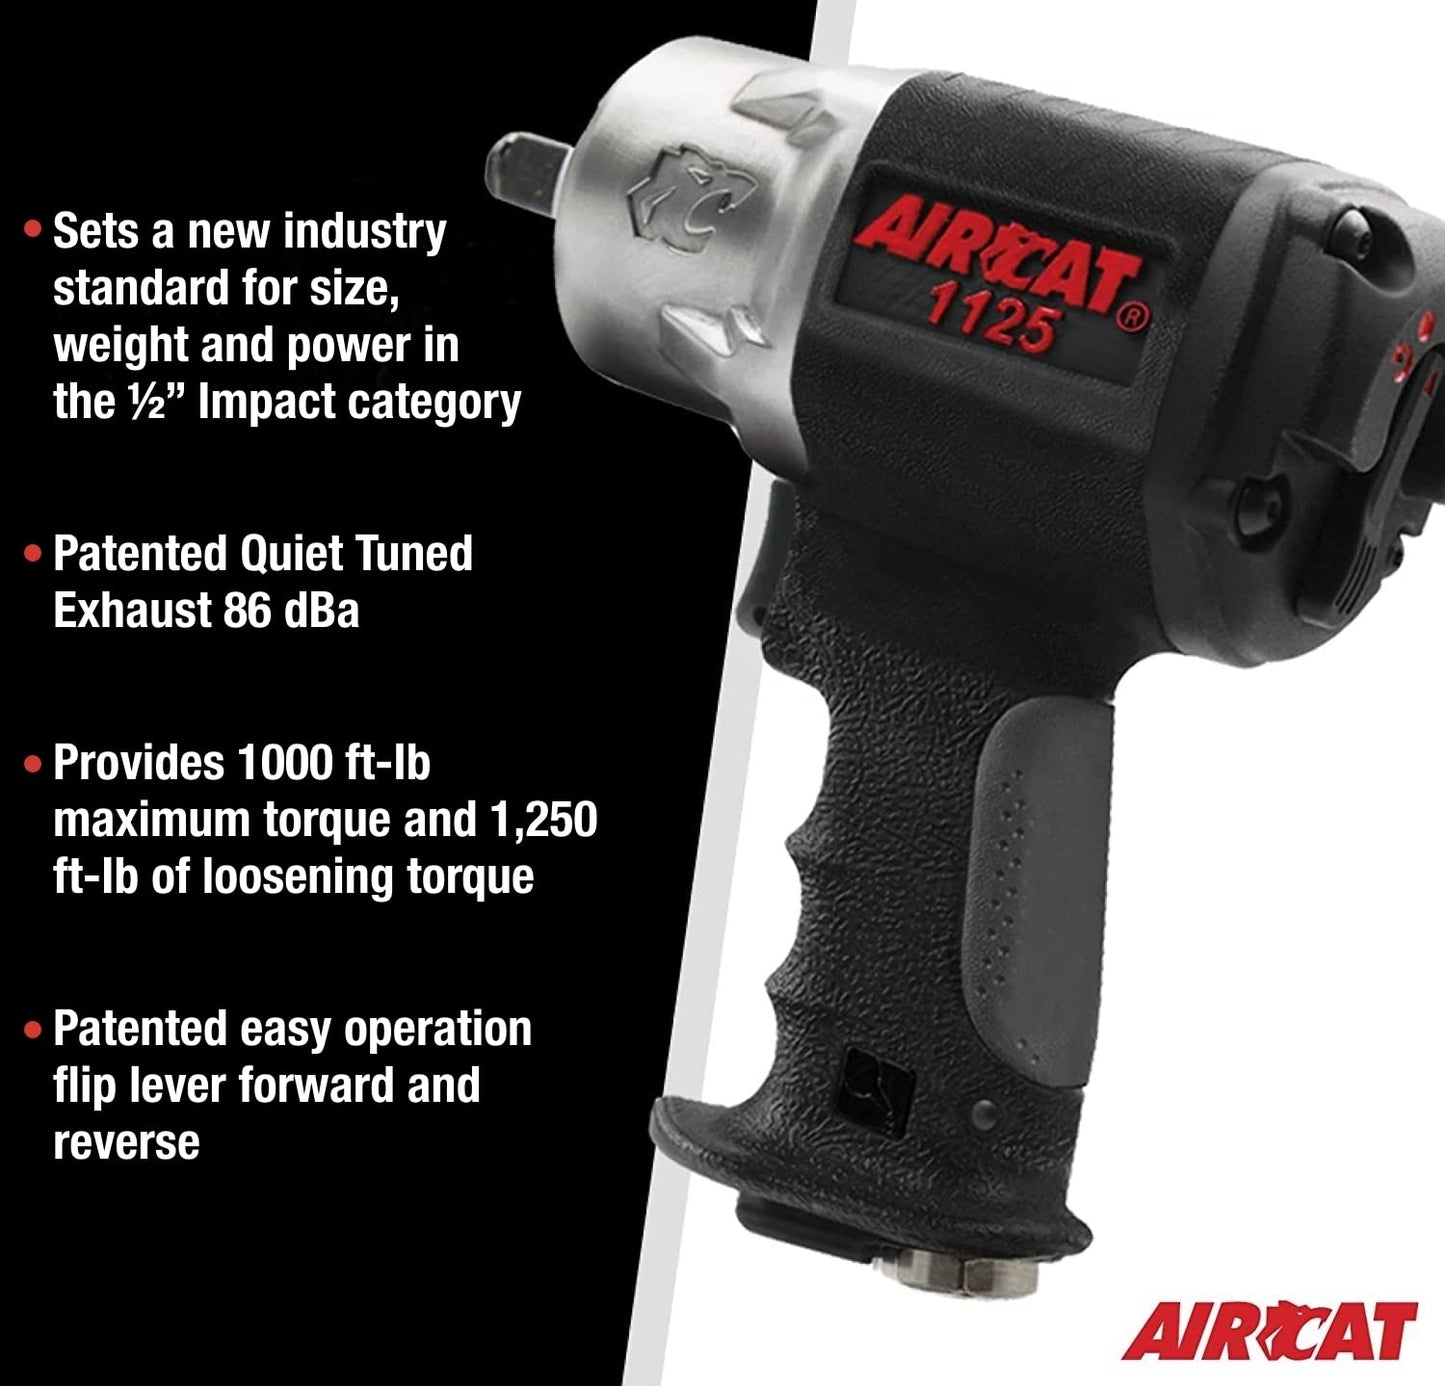 AIRCAT Pneumatic Tools 1125: 1/2" Composite Impact Wrench 1250 ft-lbs